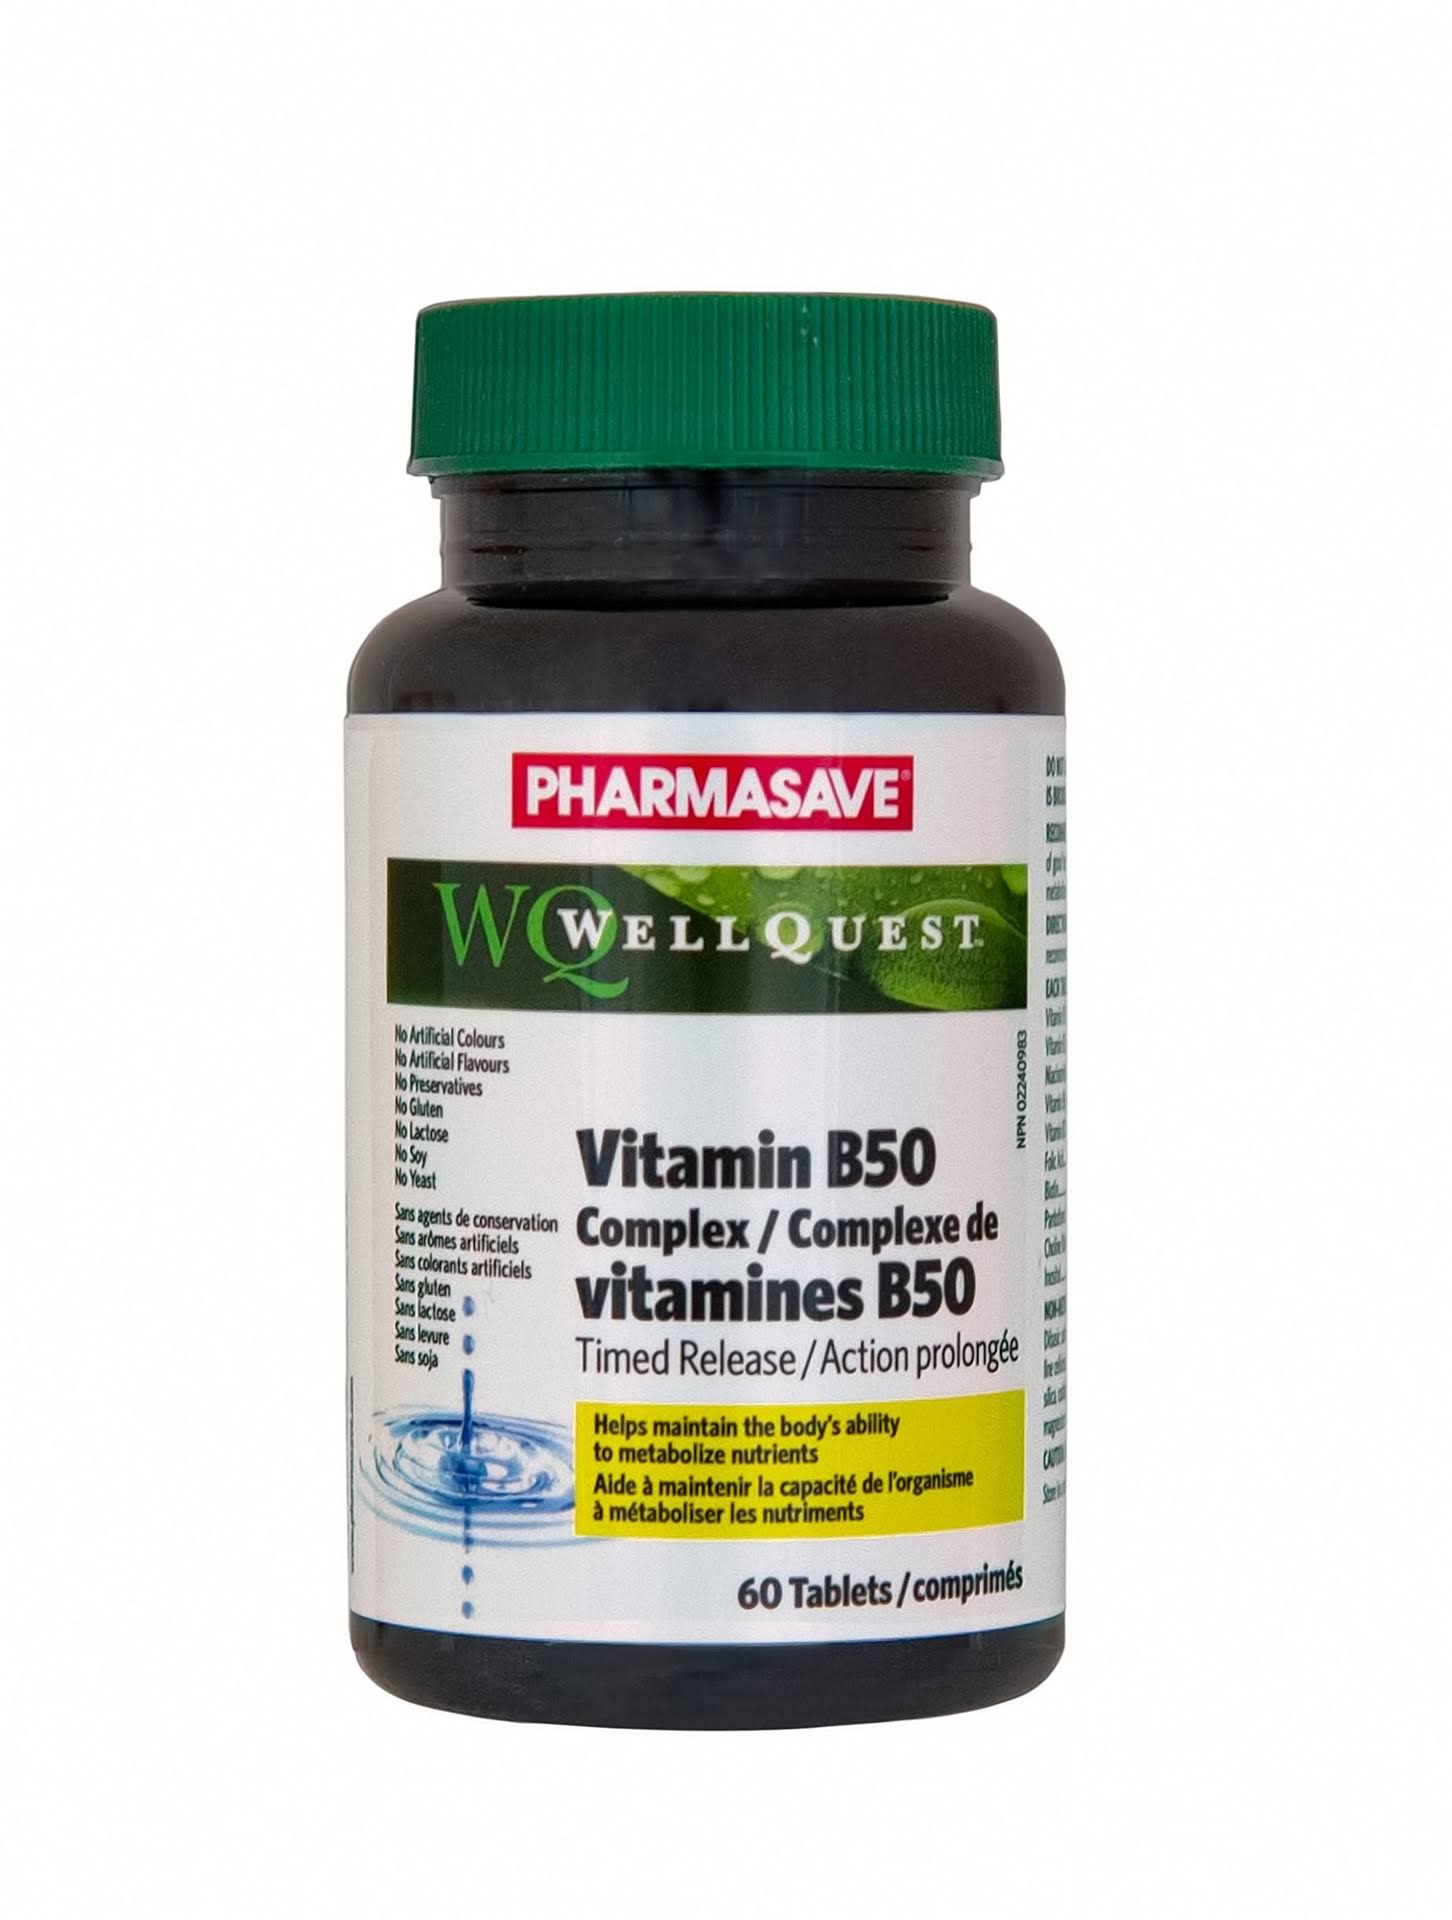 PHARMASAVE WELLQUEST VITAMIN B50 COMPLEX TIMED RELEASE 60S